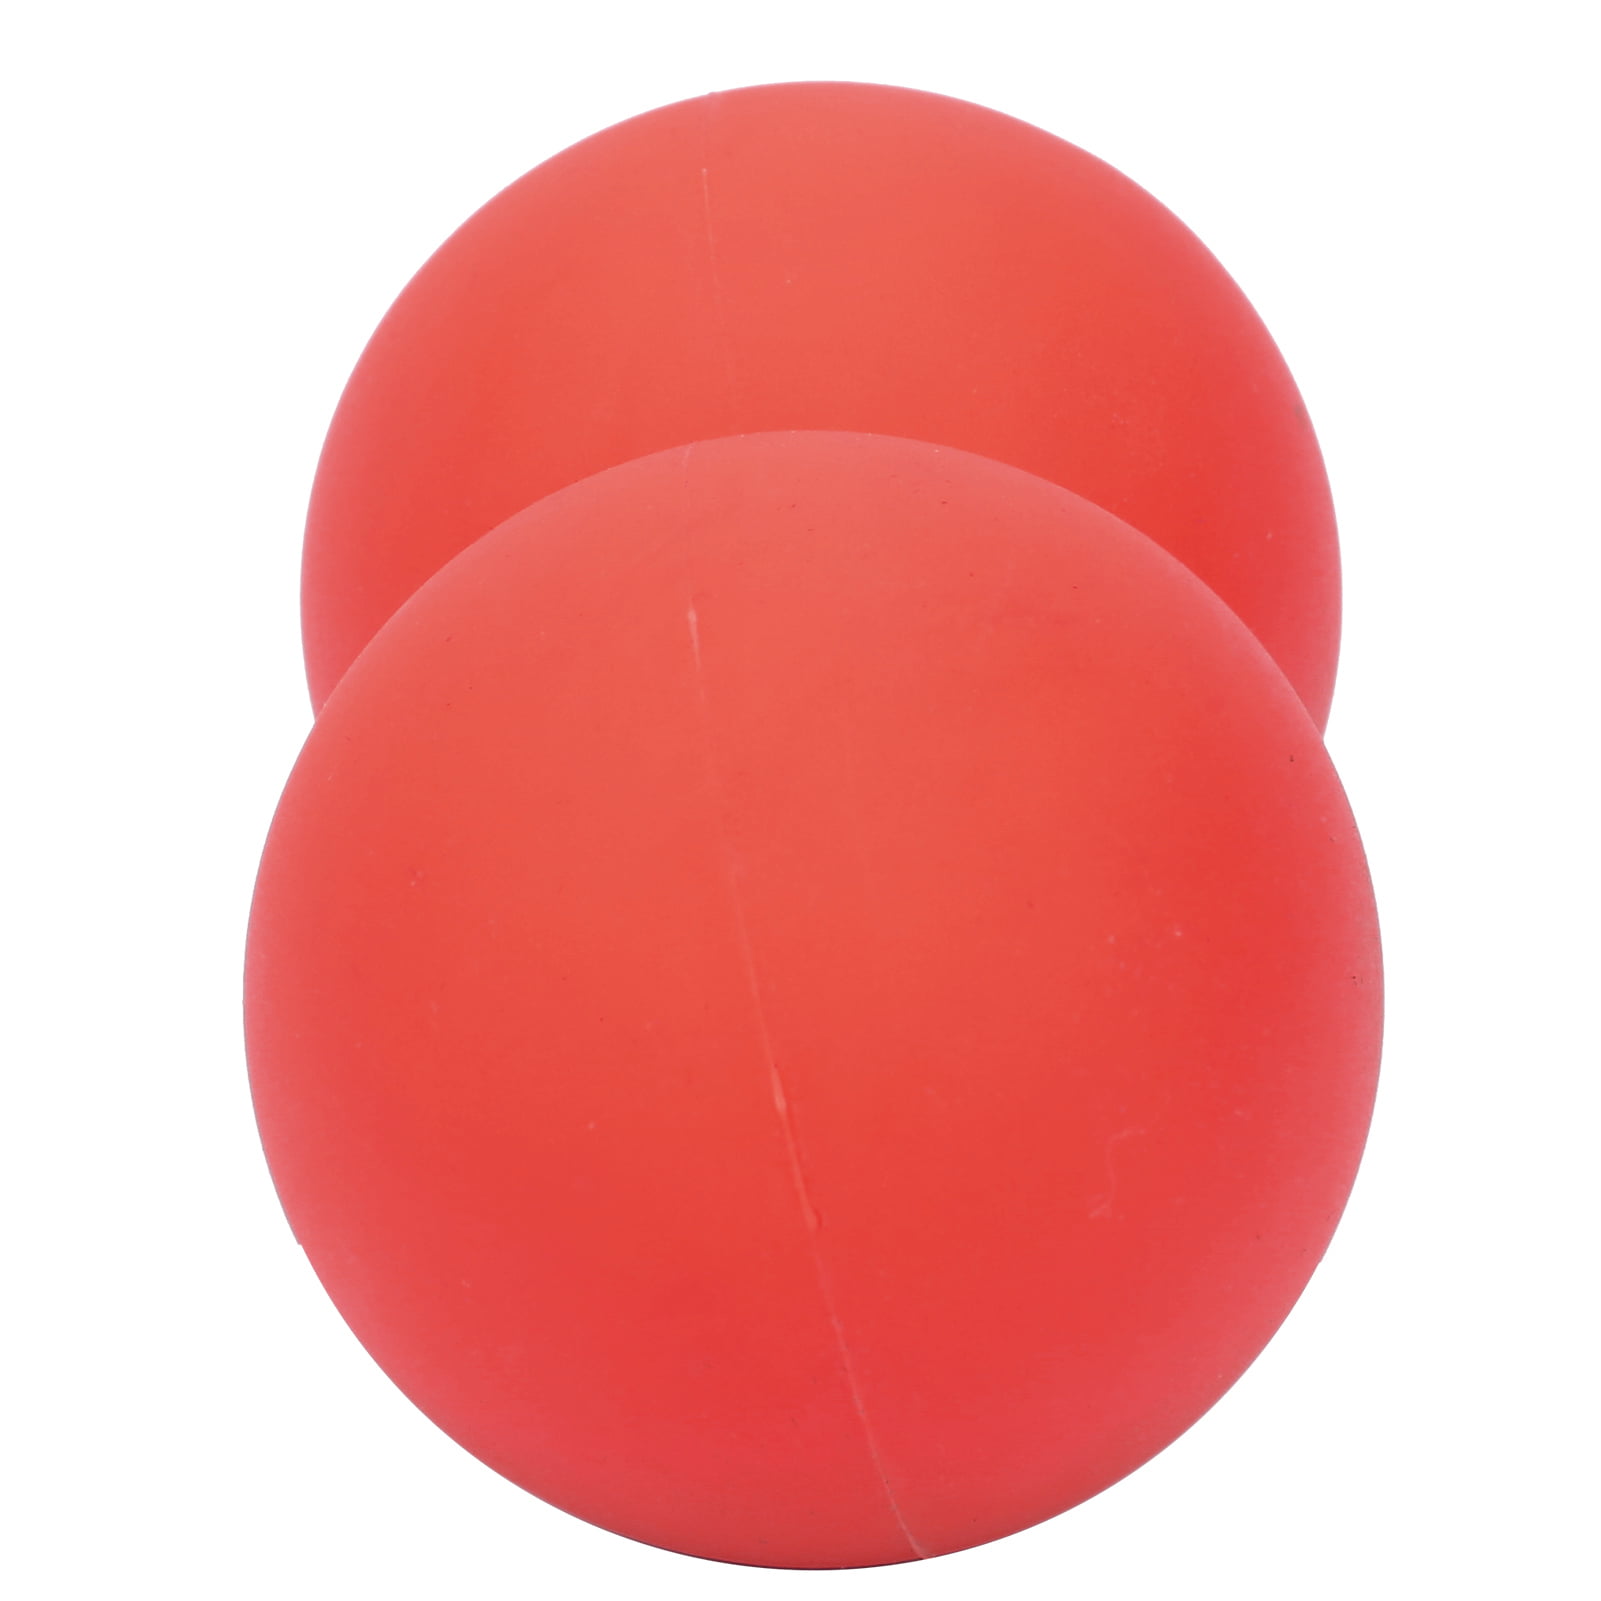 Details about   Silica Gel Workout Peanut Ball Yoga Domestic Gym Fitness Body Relax Massage Ball 